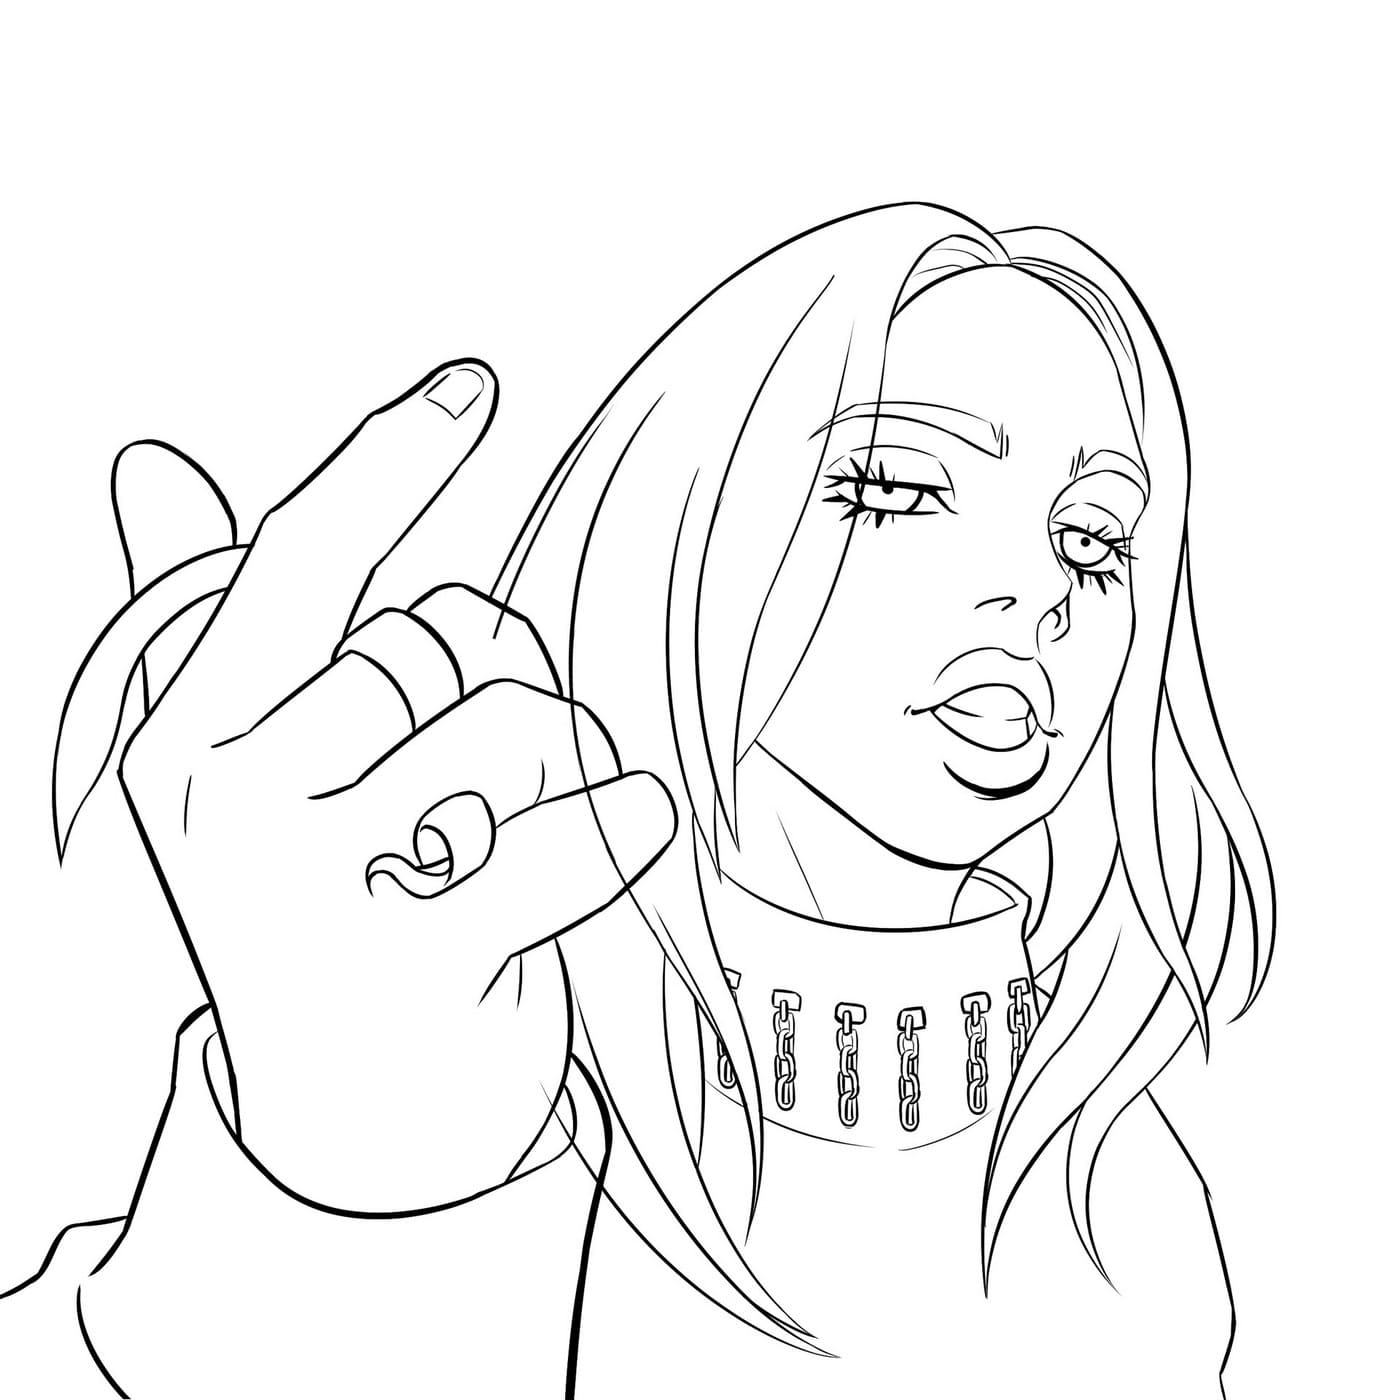 Download Coloring Pages Billie Eilish Download Or Print For Free